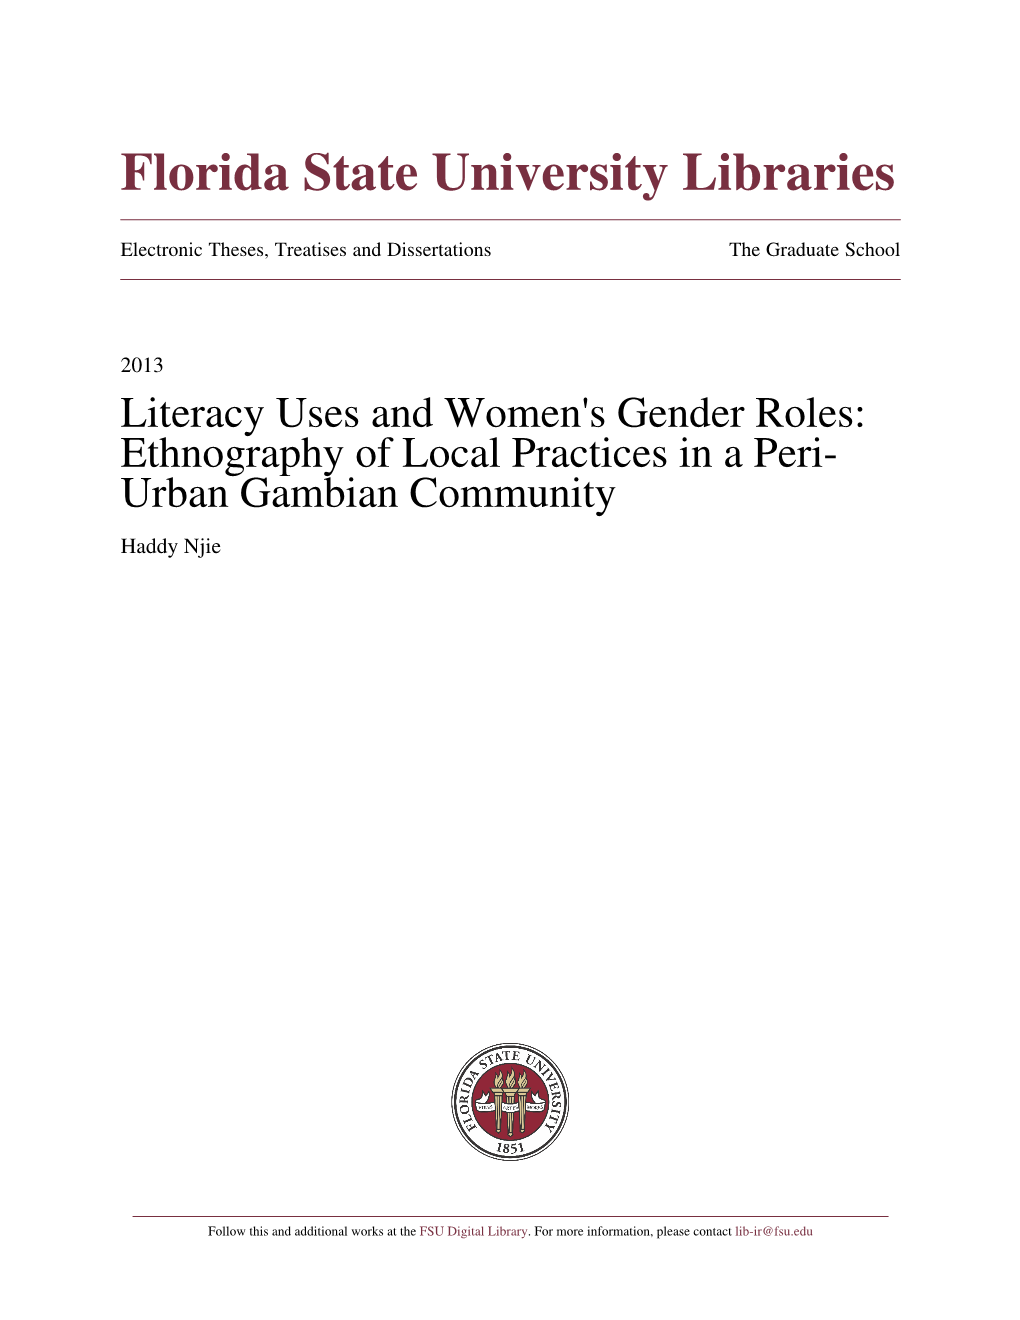 Literacy Uses and Womenâ•Žs Gender Roles